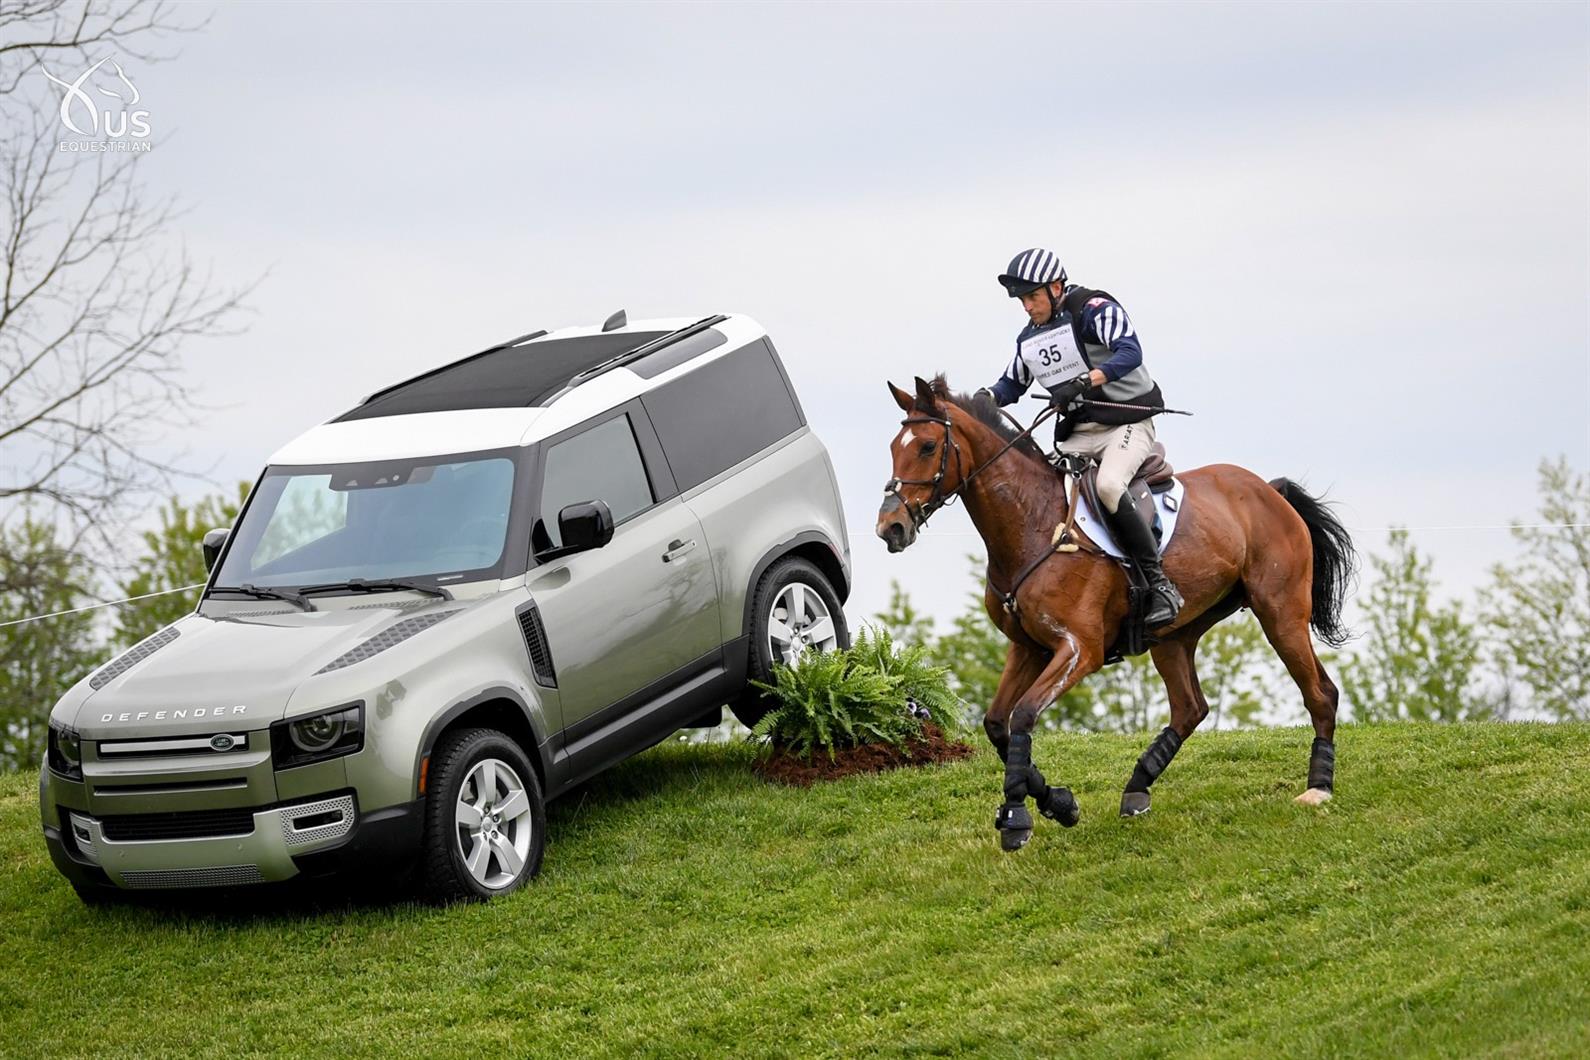 Oliver Townend and Ballaghmor Class Take Over Lead in 2021 Land Rover  Kentucky Three-Day Event presented by MARS Equestrian™; Boyd Martin and On  Cue Hold Second Place Heading into Final Day of